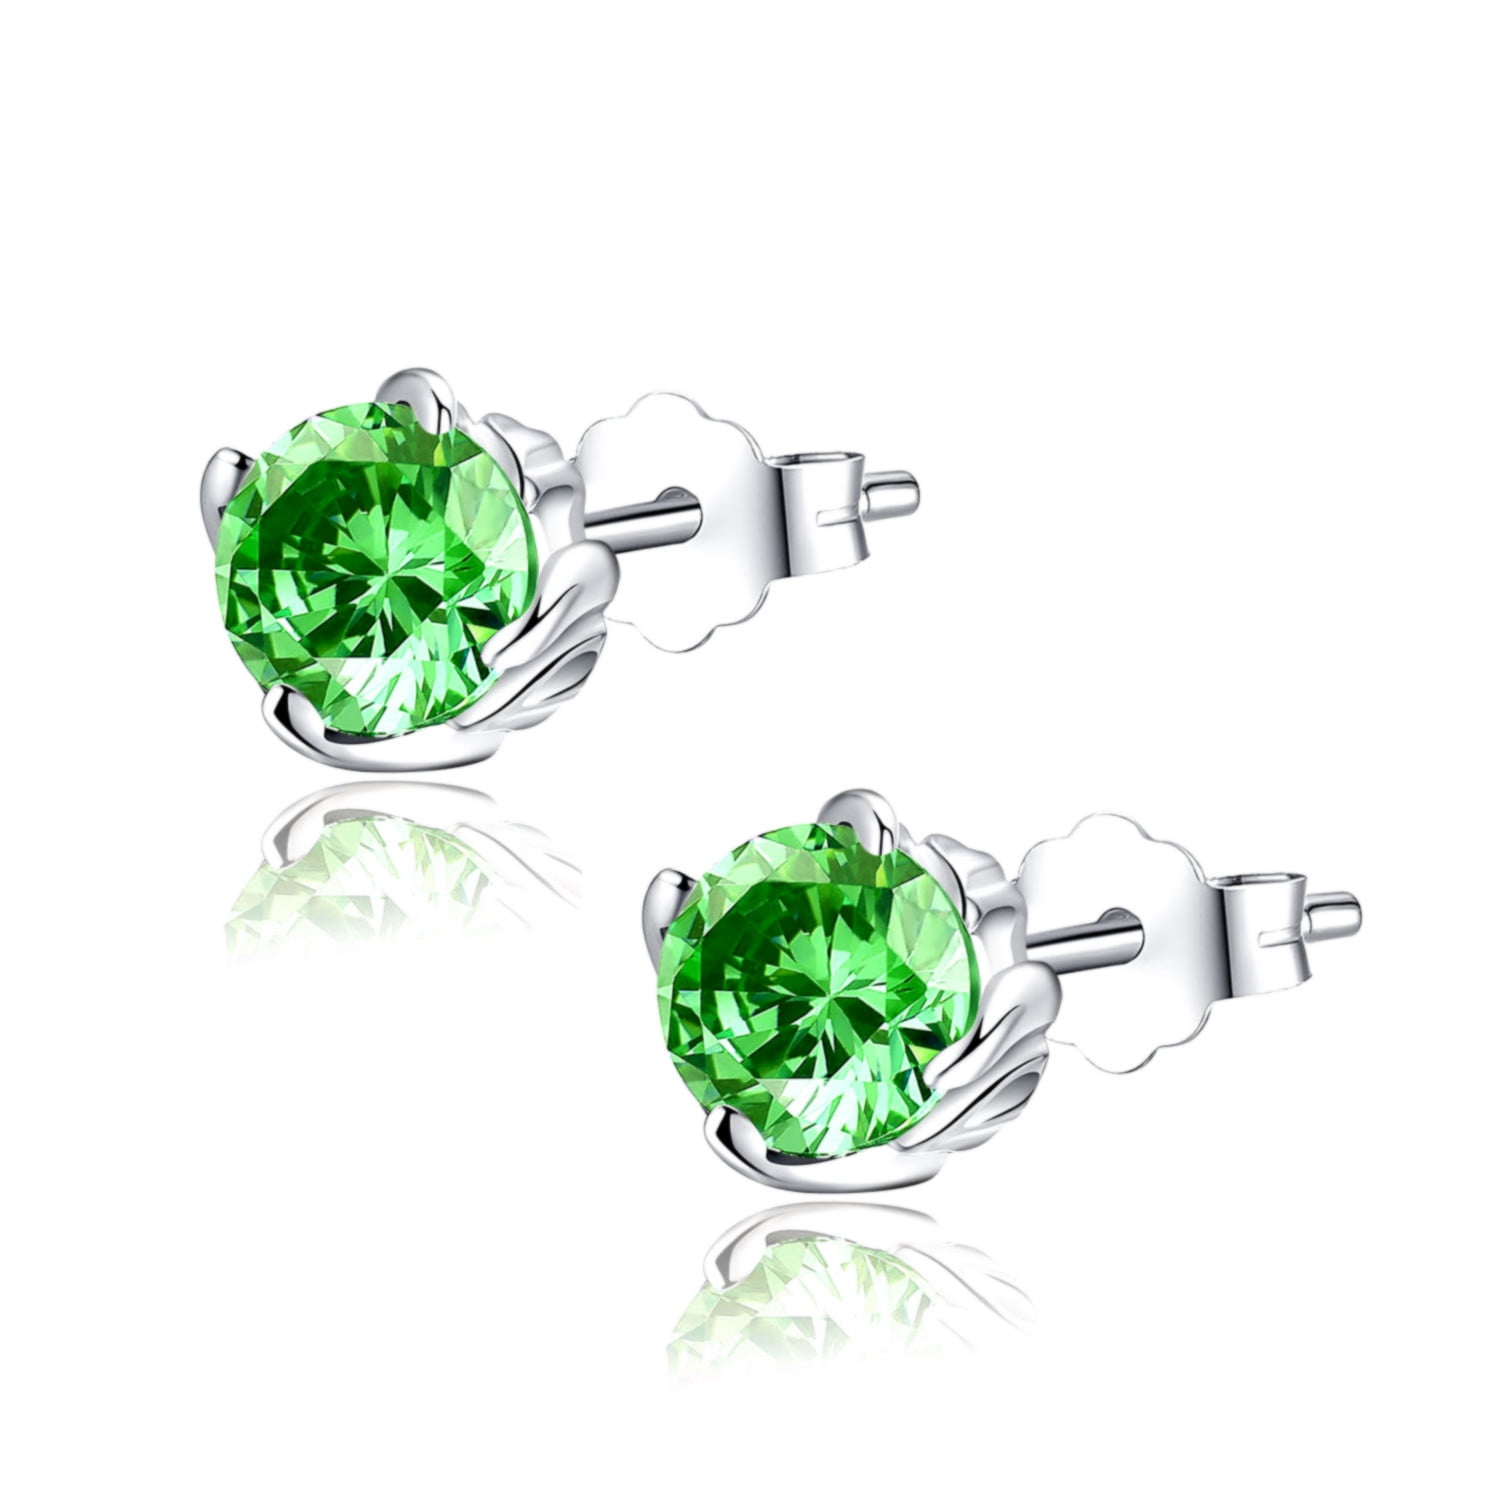 Devuggo Sterling Silver Round Shaped Simulated Emerald Stud Earrings for Women